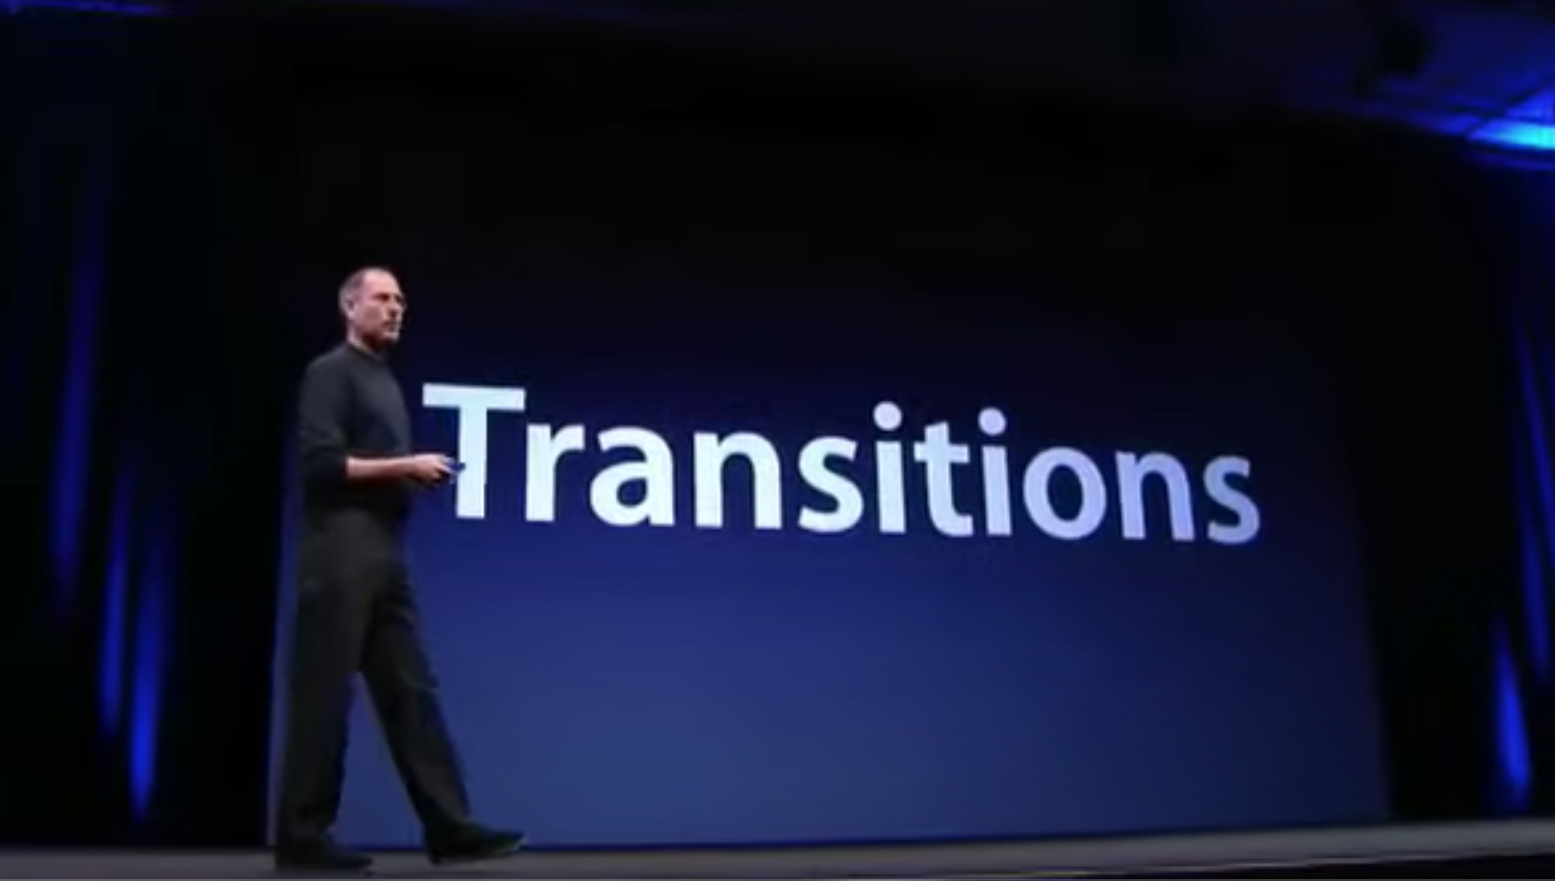 Let's talk about transitions